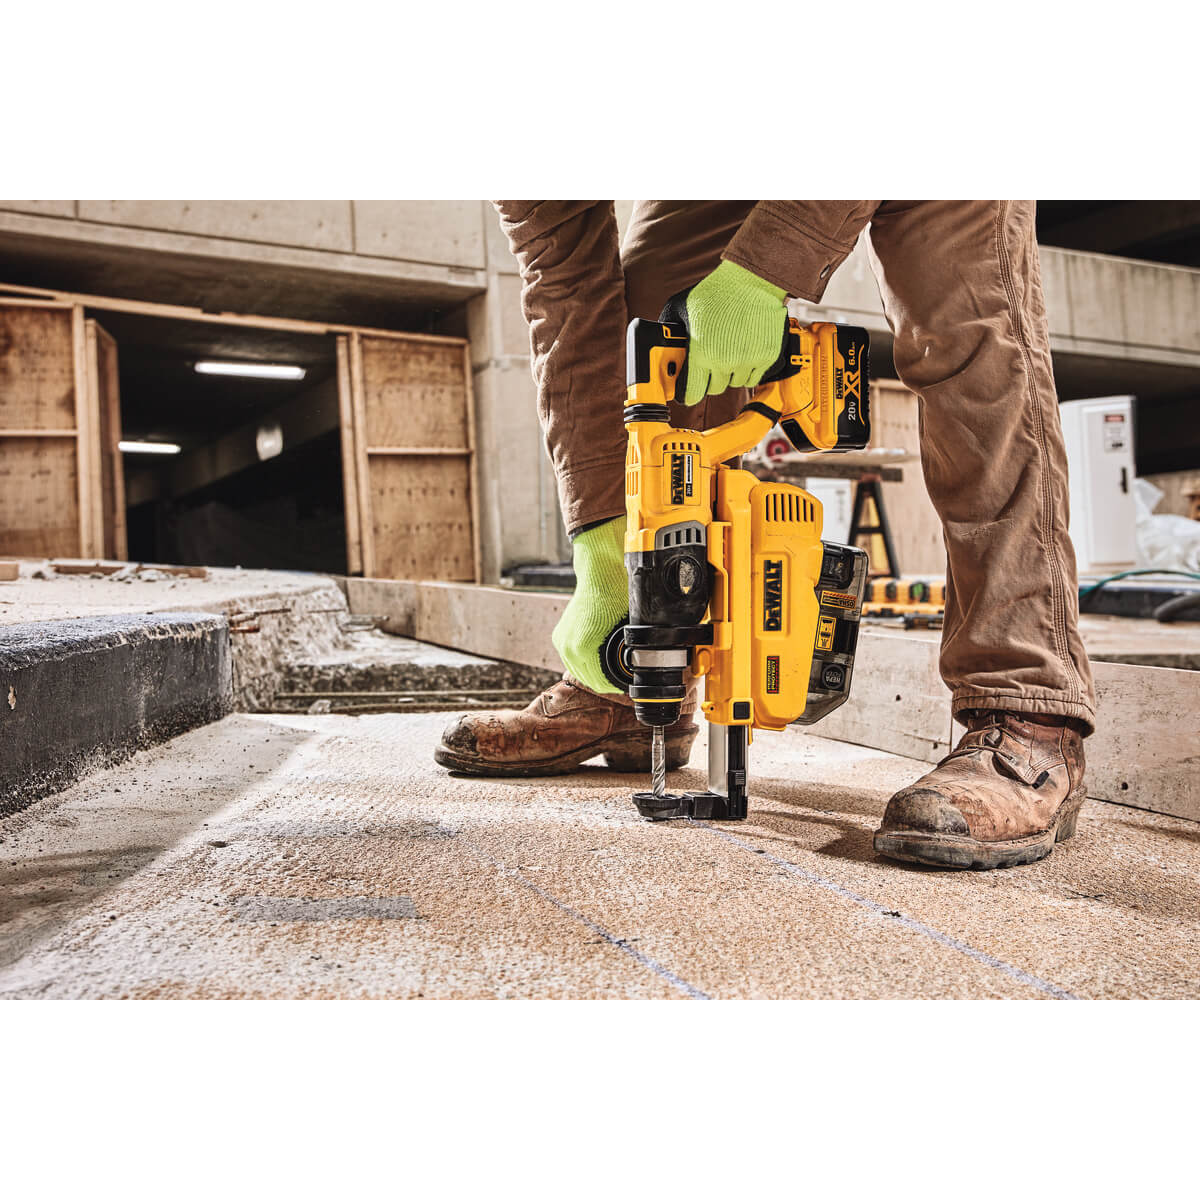 DEWALT DCH263R2 1-1/8 IN. SDS PLUS D-HANDLE ROTARY HAMMER KIT - wise-line-tools